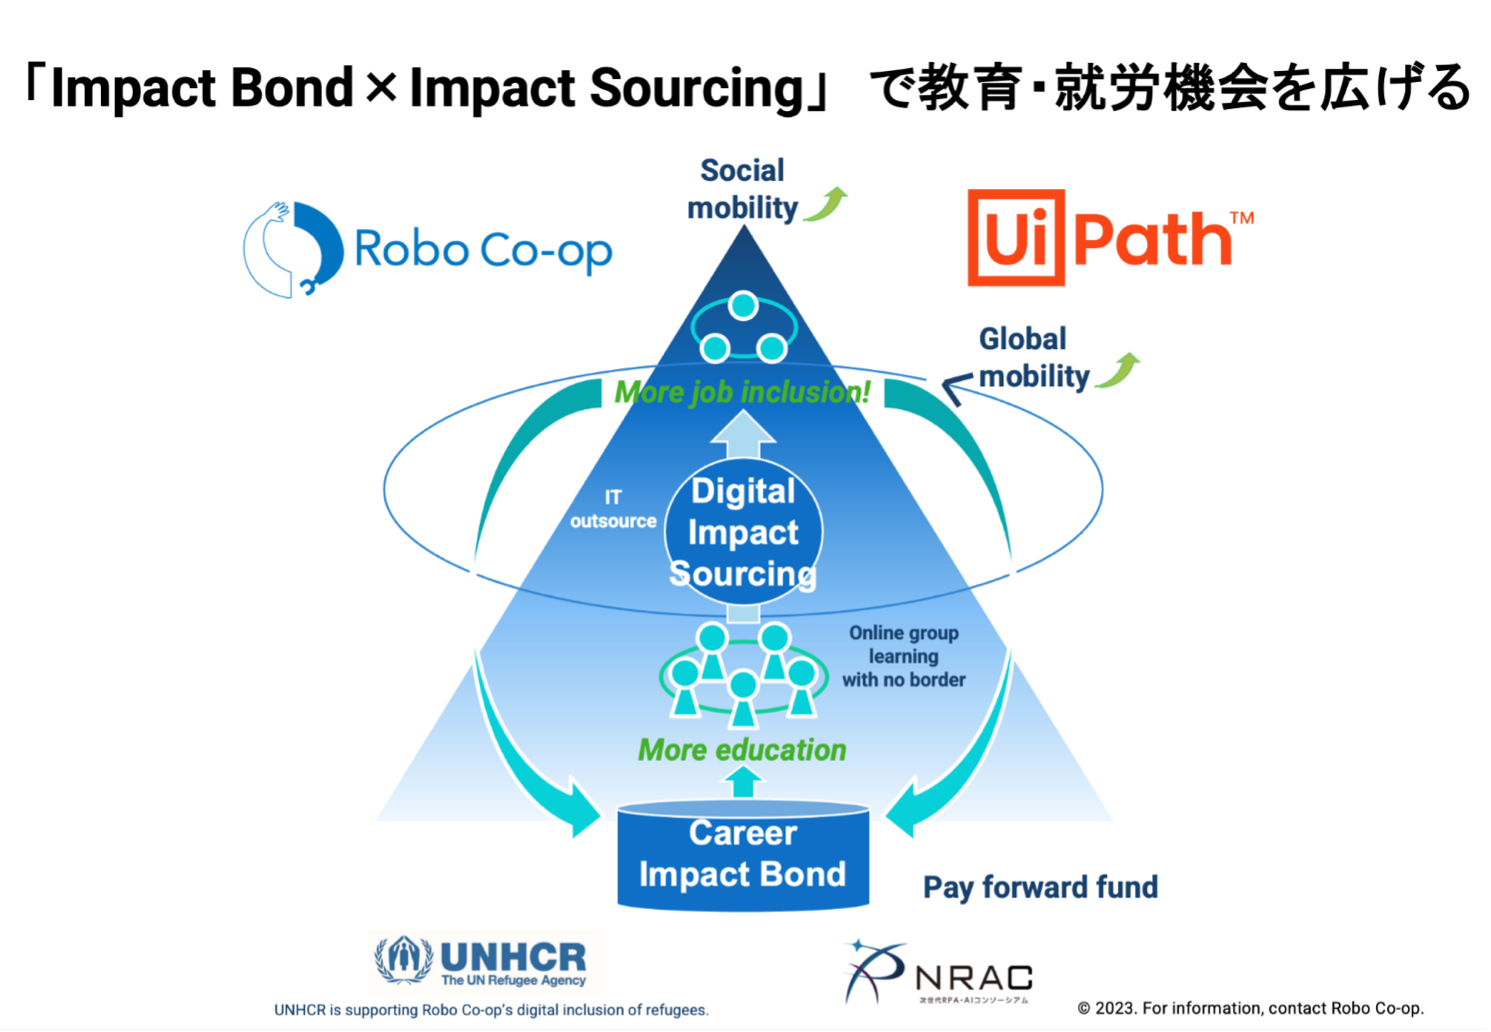 Figure1: The Vision of Robo Co-op and UiPath collabolation